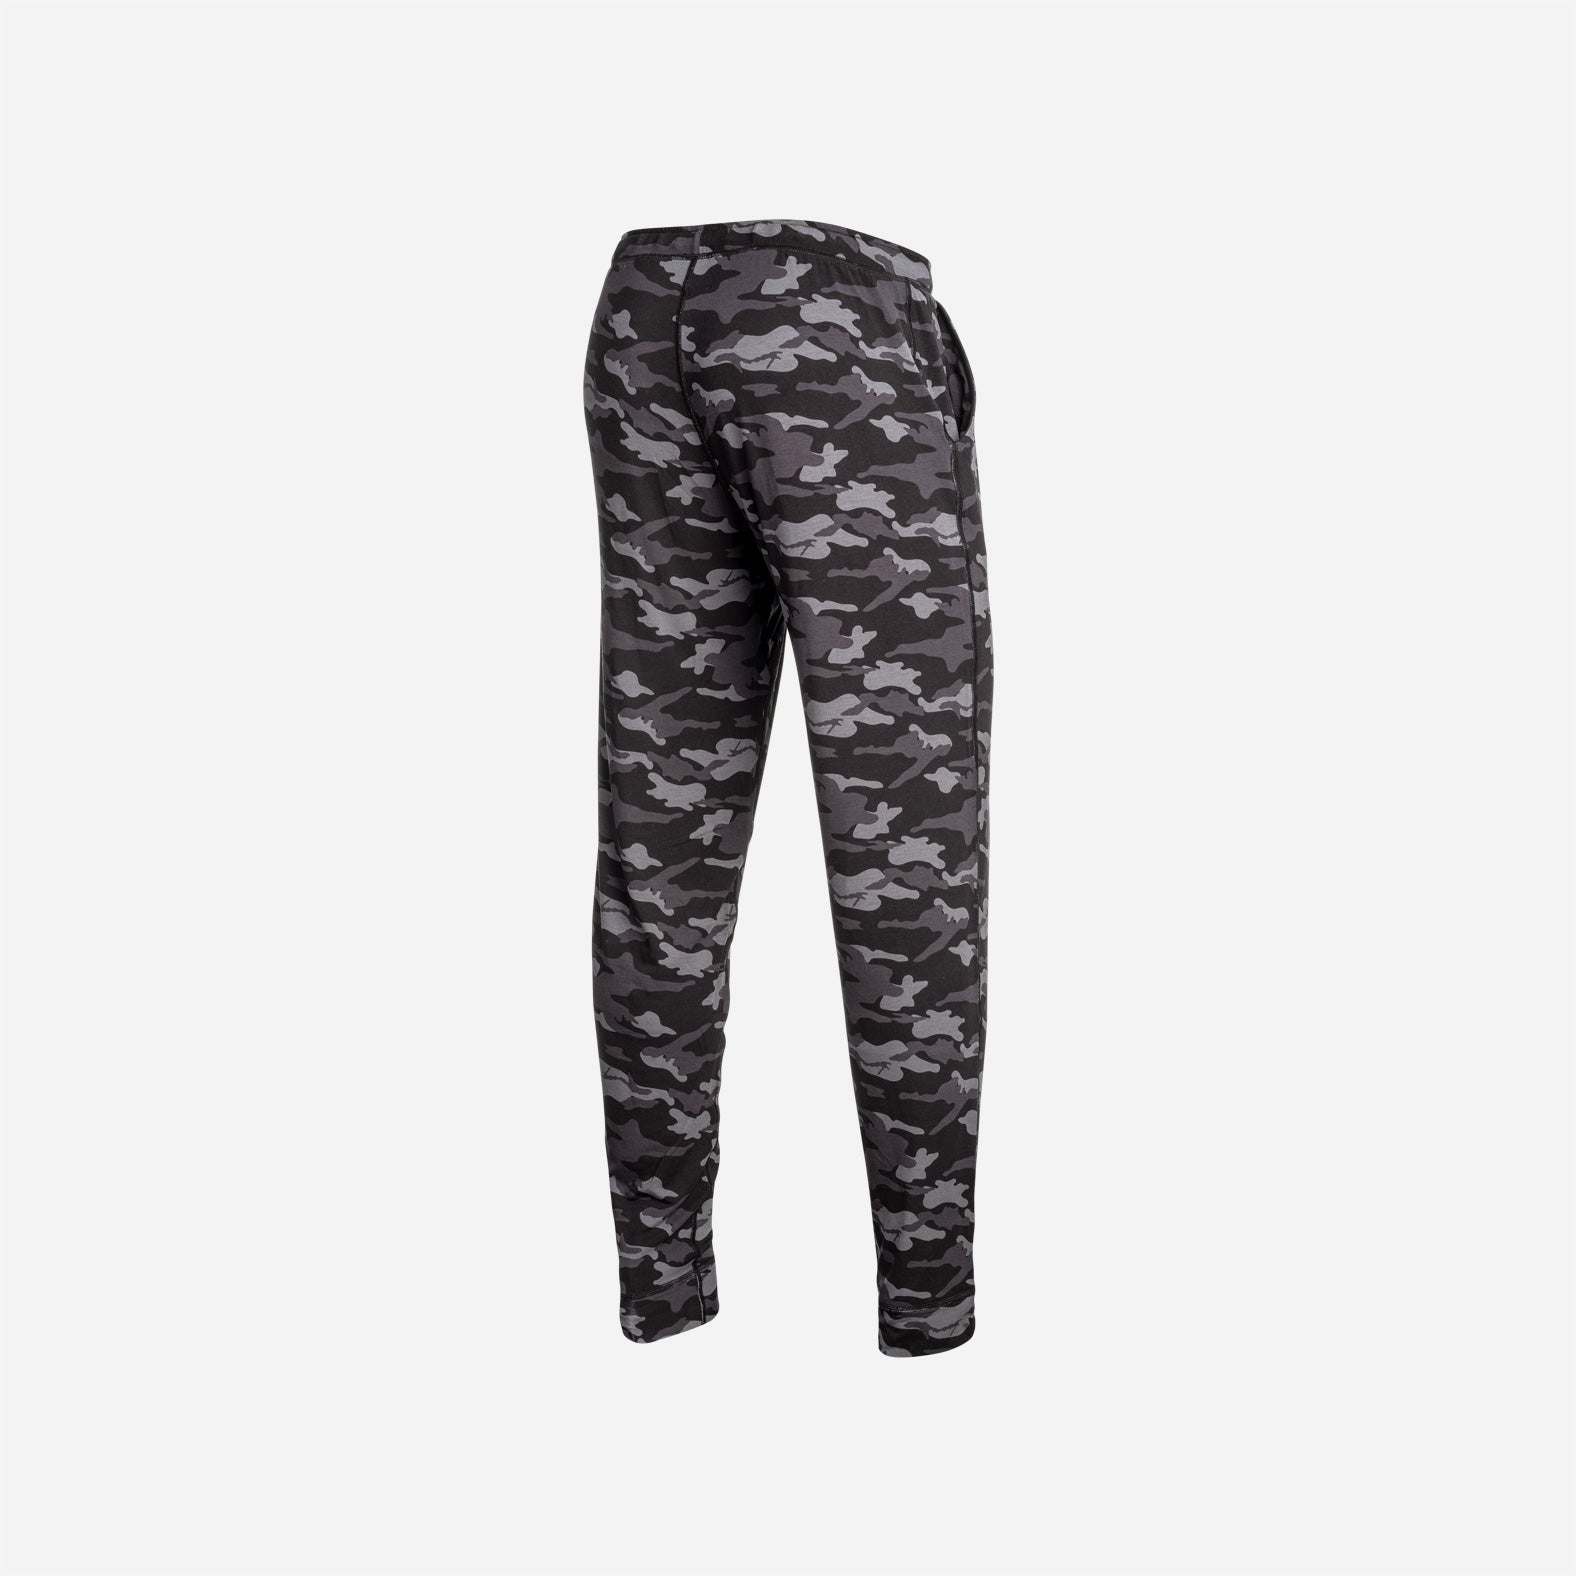 black and grey camo leggings outfit｜TikTok Search